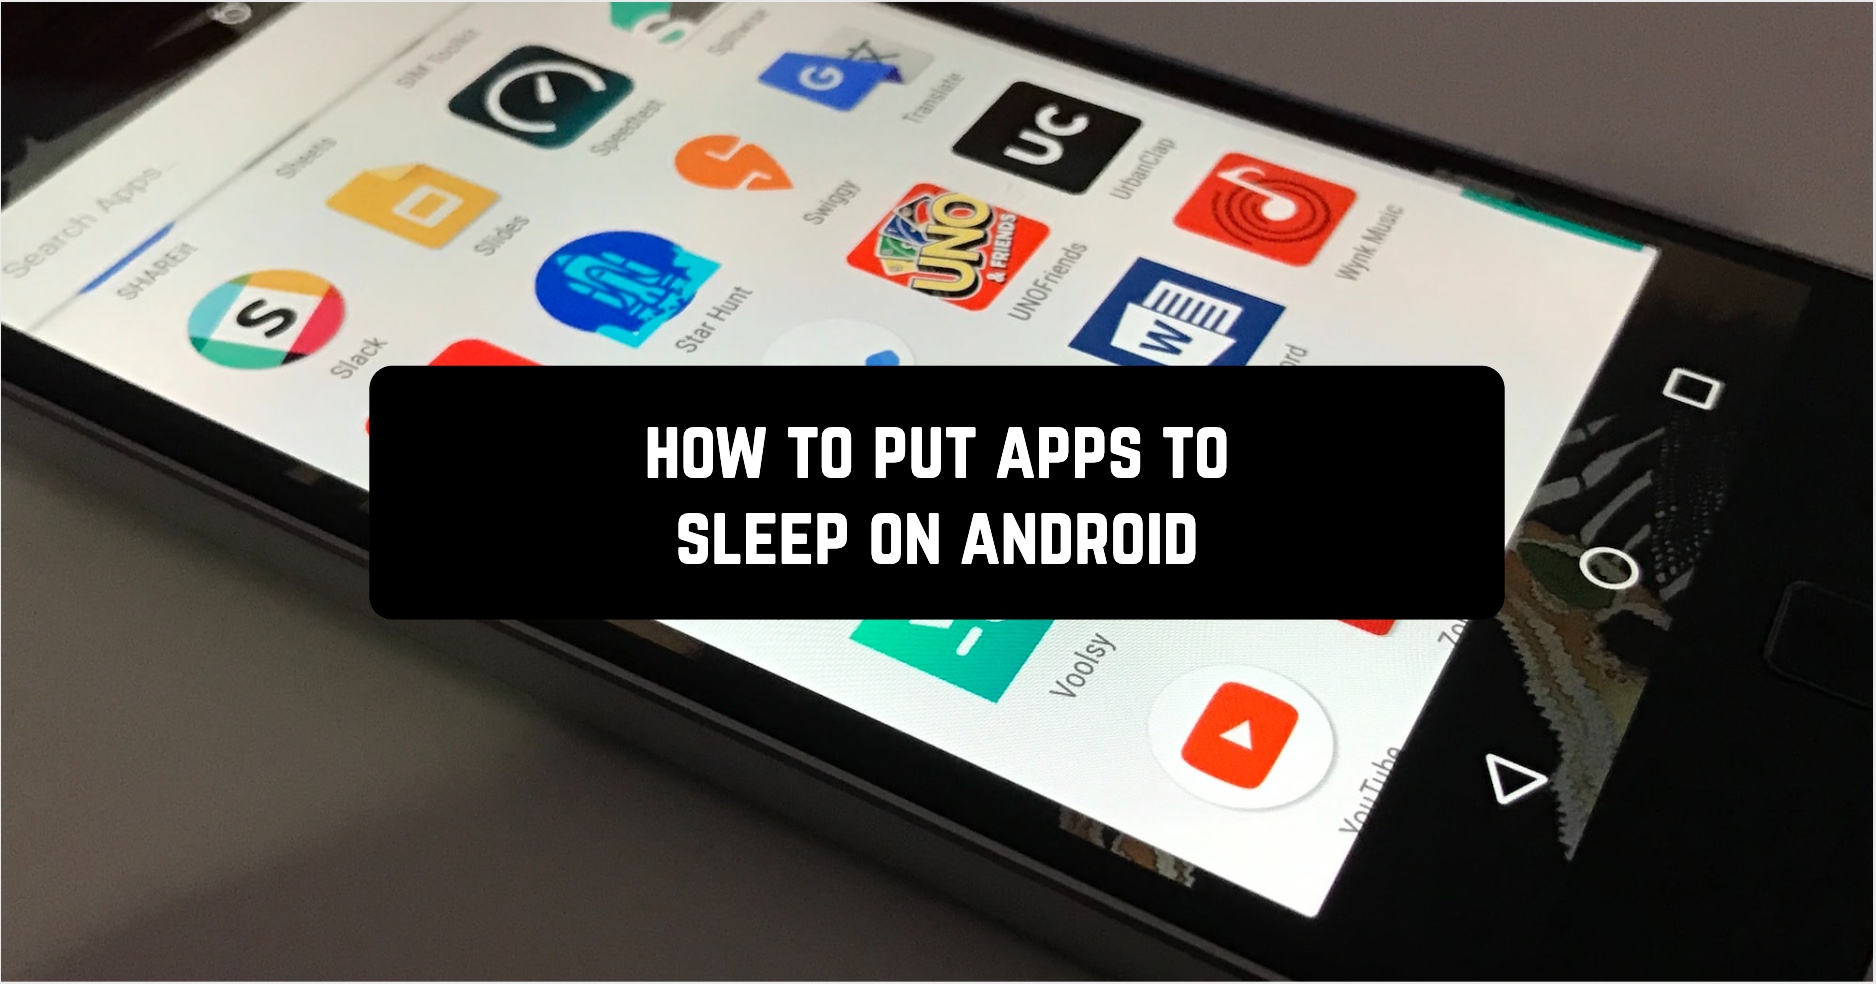 How to put apps to sleep on Android